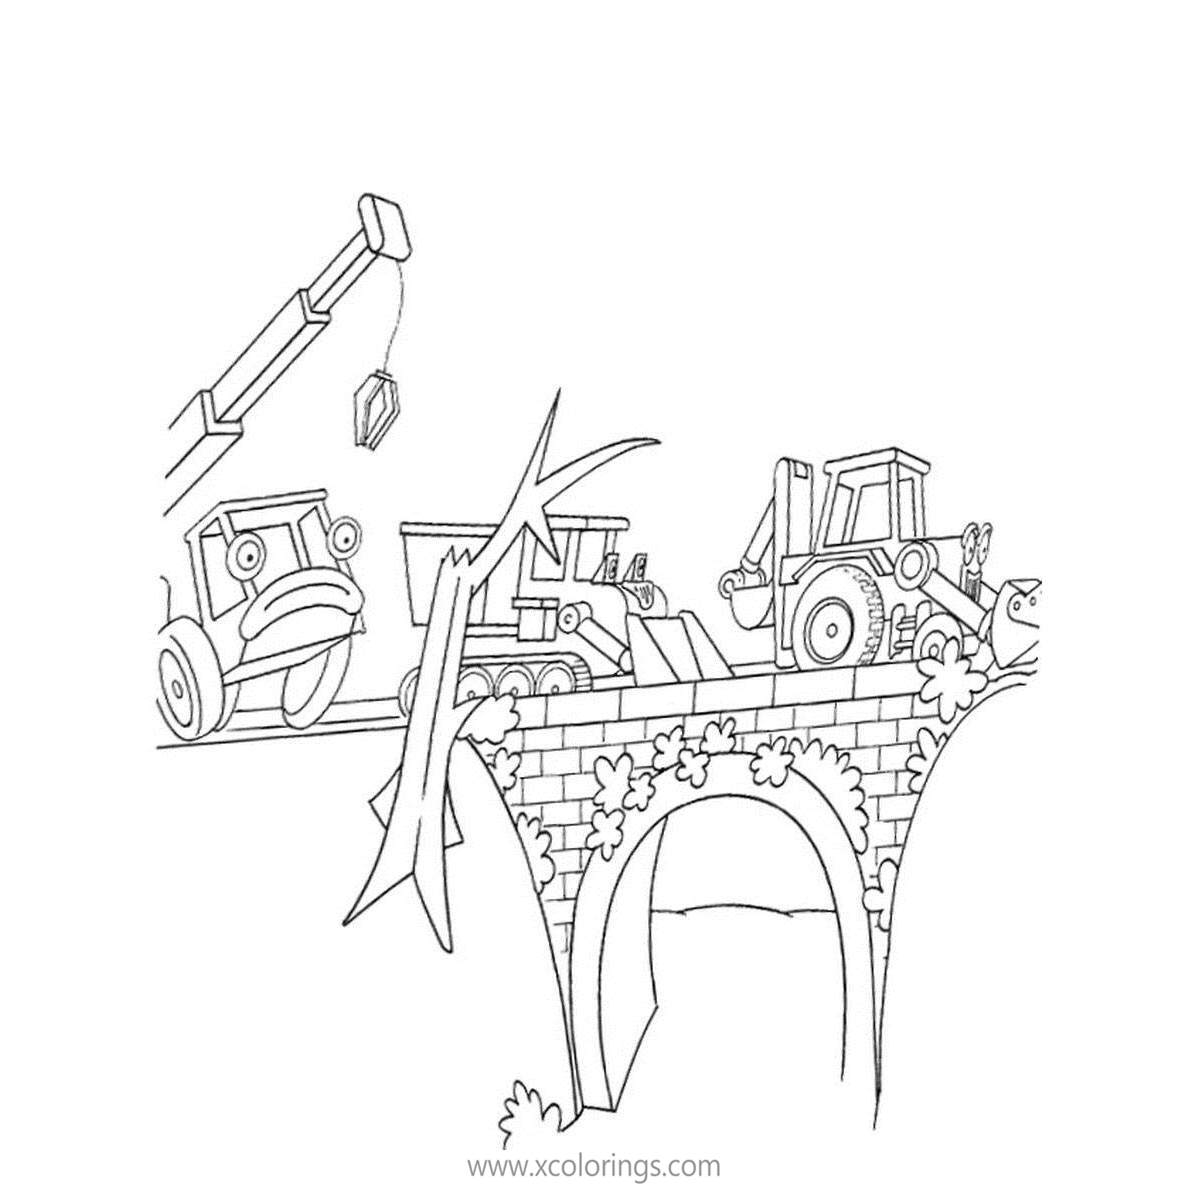 Free Bob The Builder Coloring Pages Machines are on the Bridge printable